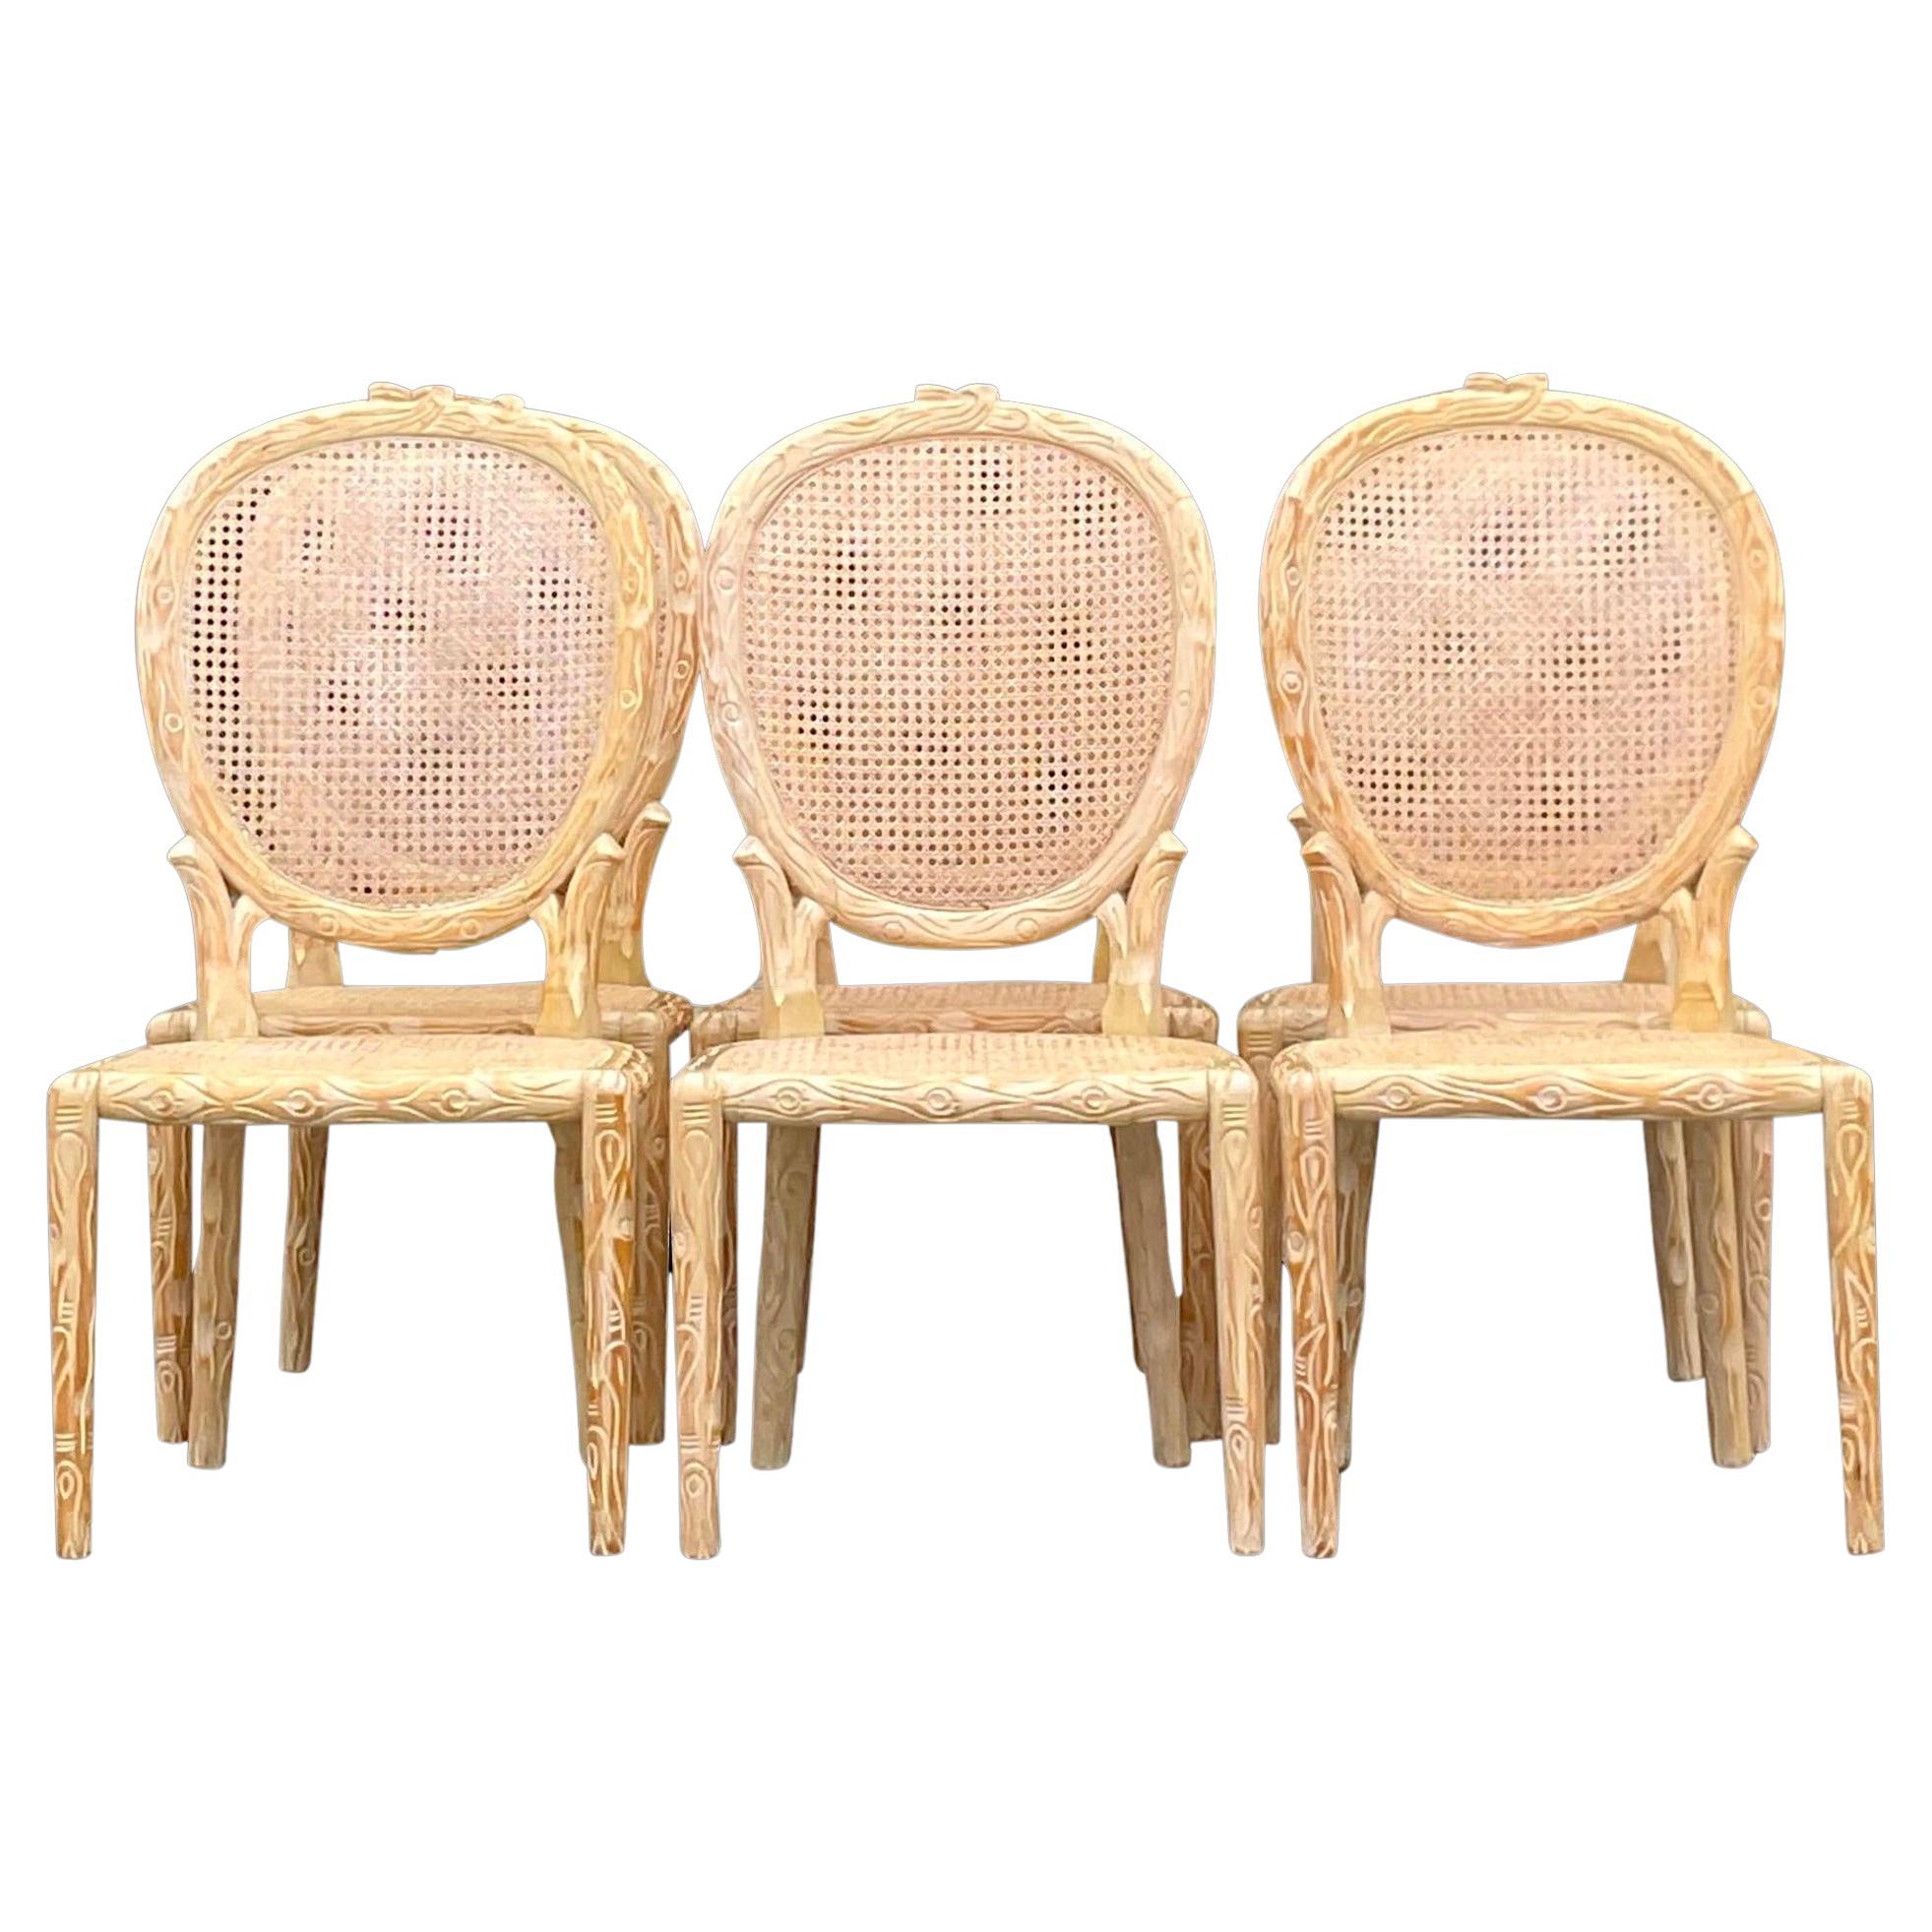 Vintage Boho Hand Carved Faux Bois Cane Dining Chairs - Set of 6 For Sale